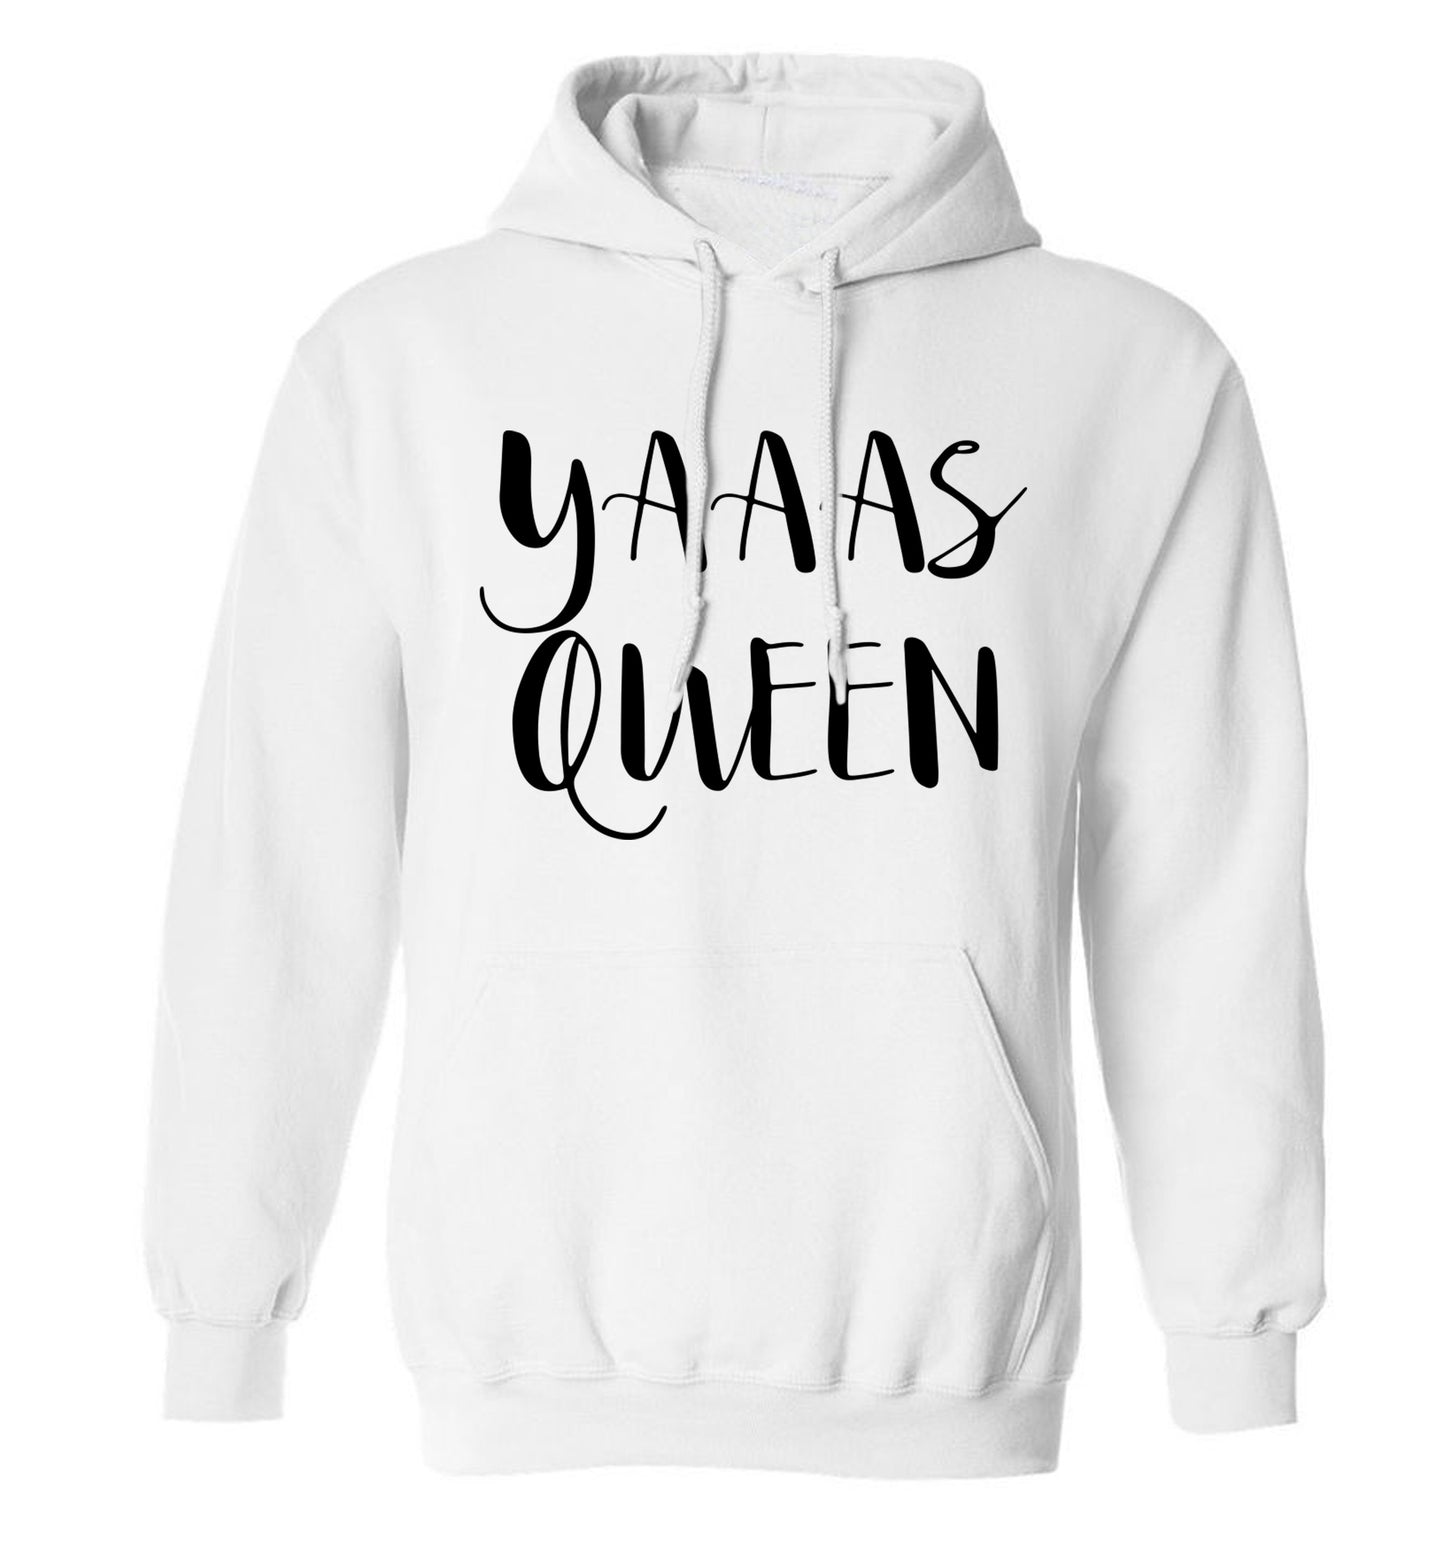 Yas Queen adults unisex white hoodie 2XL